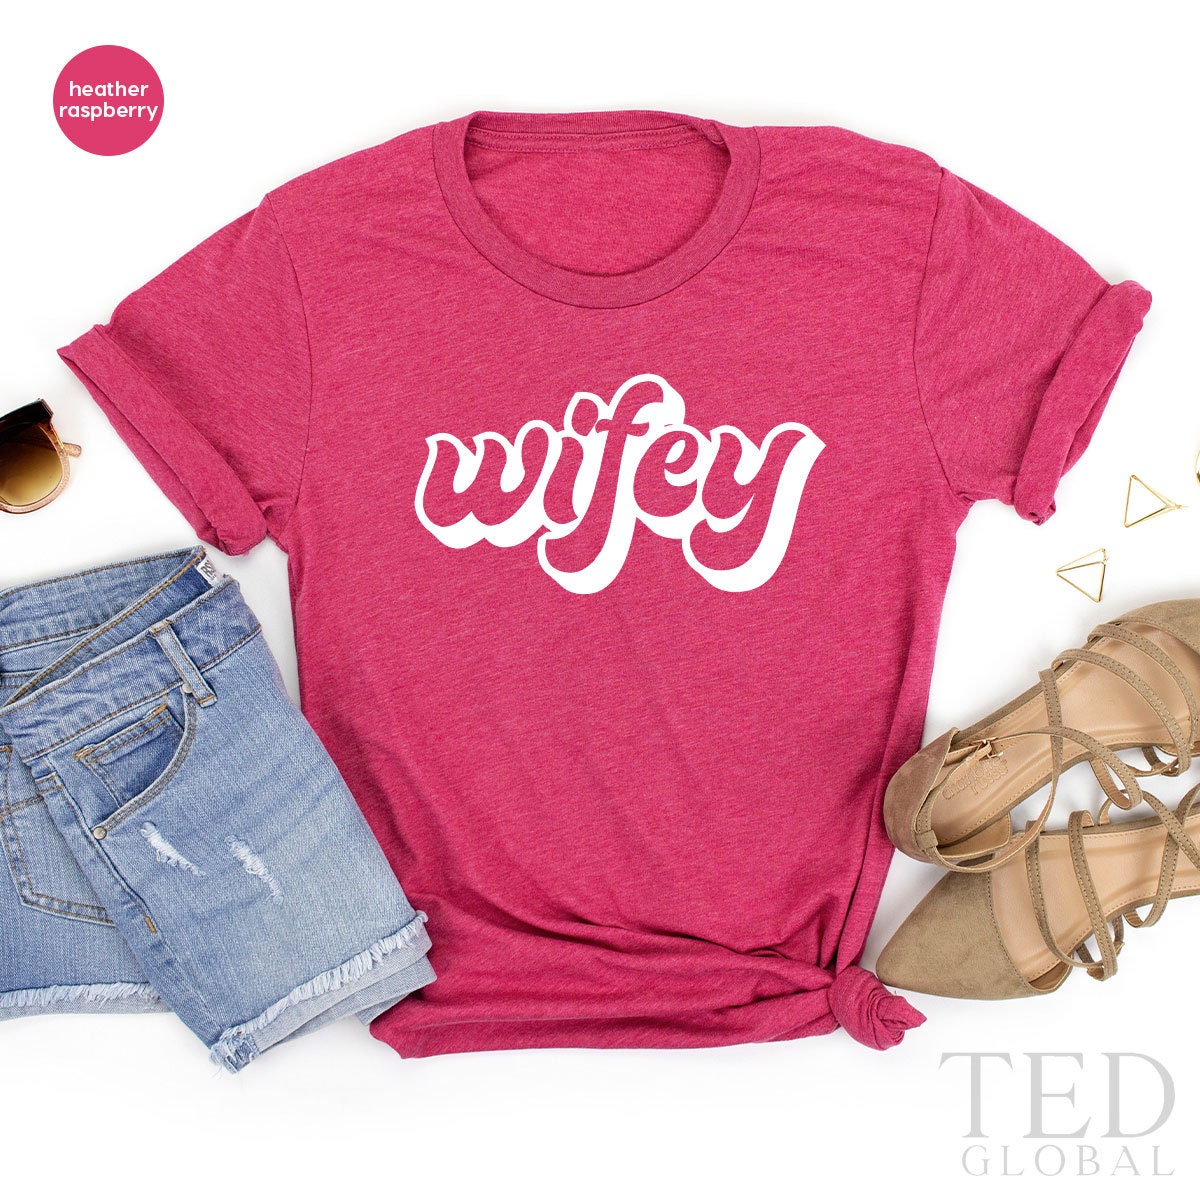 Retro Wifey T Shirt, Engagement TShirt, Just Married Shirts, New Wife Gift, Wedding Party T-Shirt, Bridal Gift Engagement, Wifey Shirt - Fastdeliverytees.com